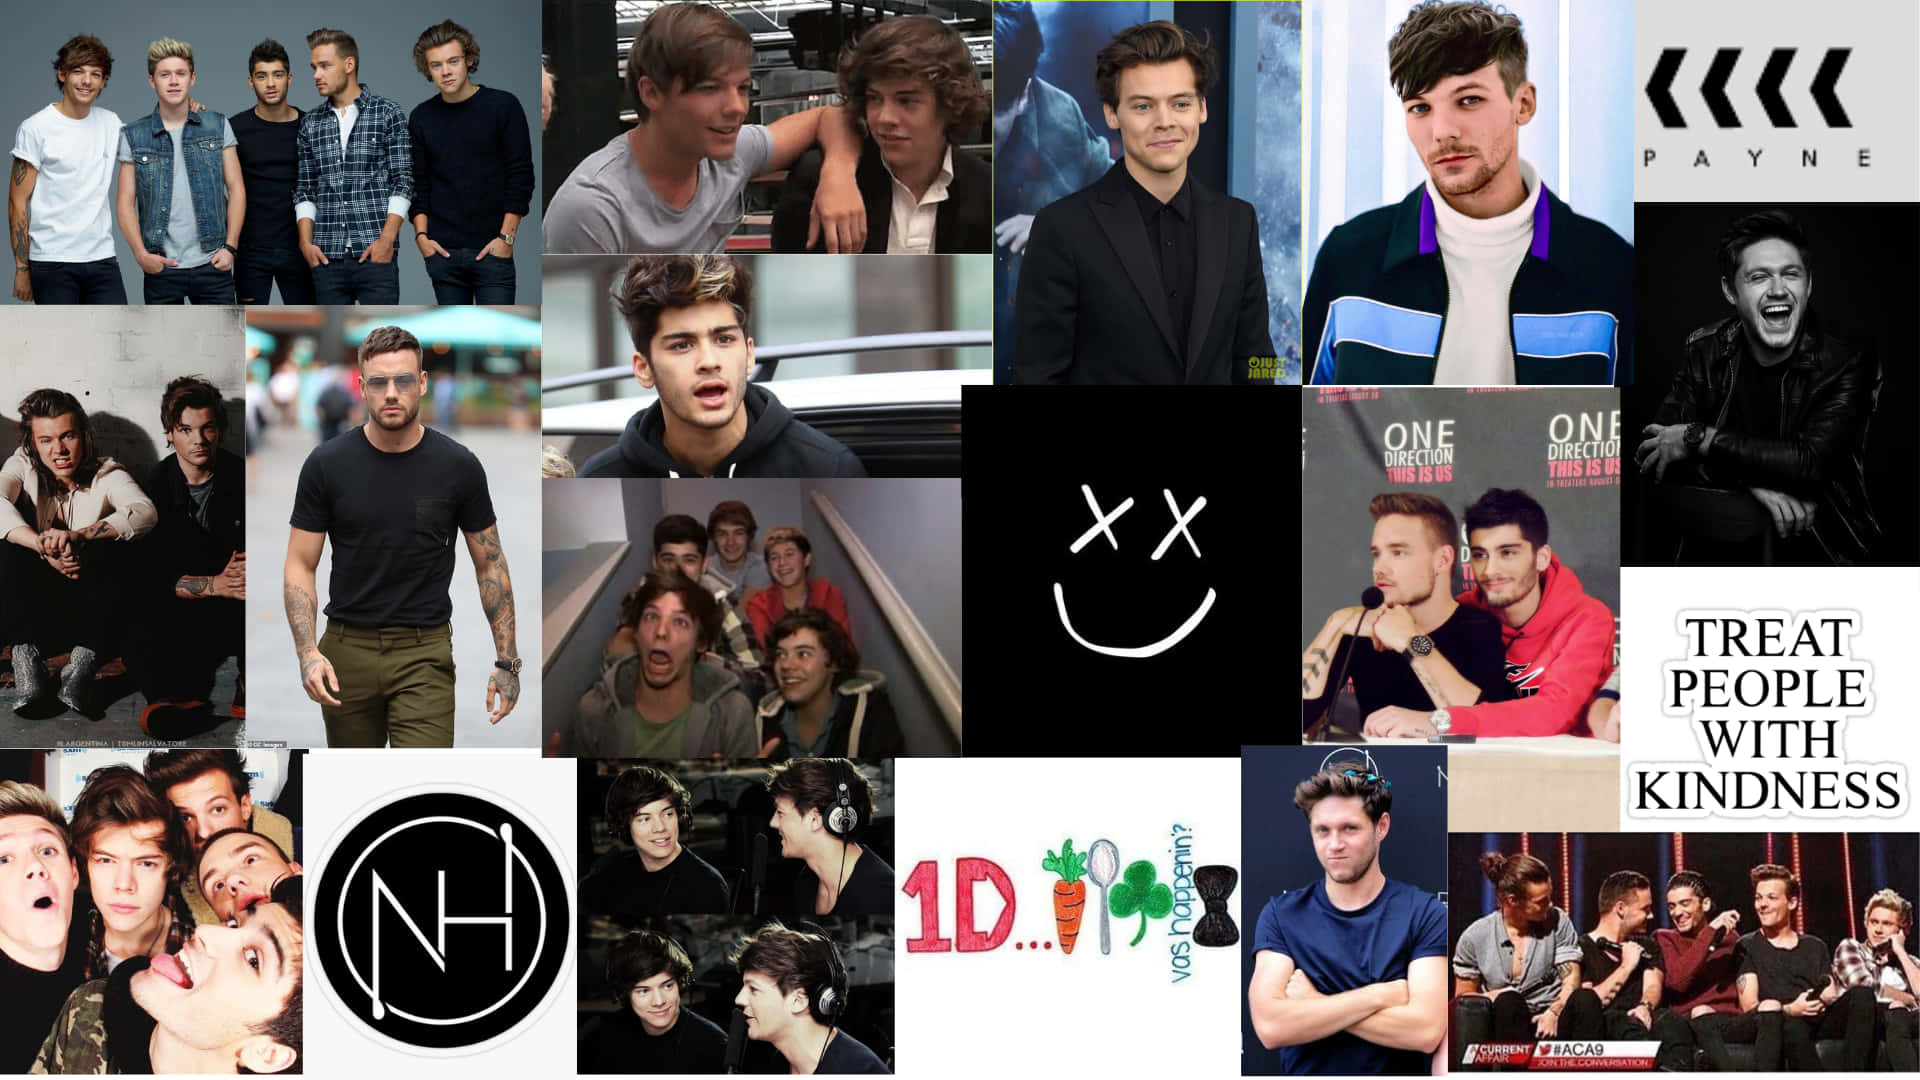 Enjoy the tunes of One Direction on your favourite laptop Wallpaper